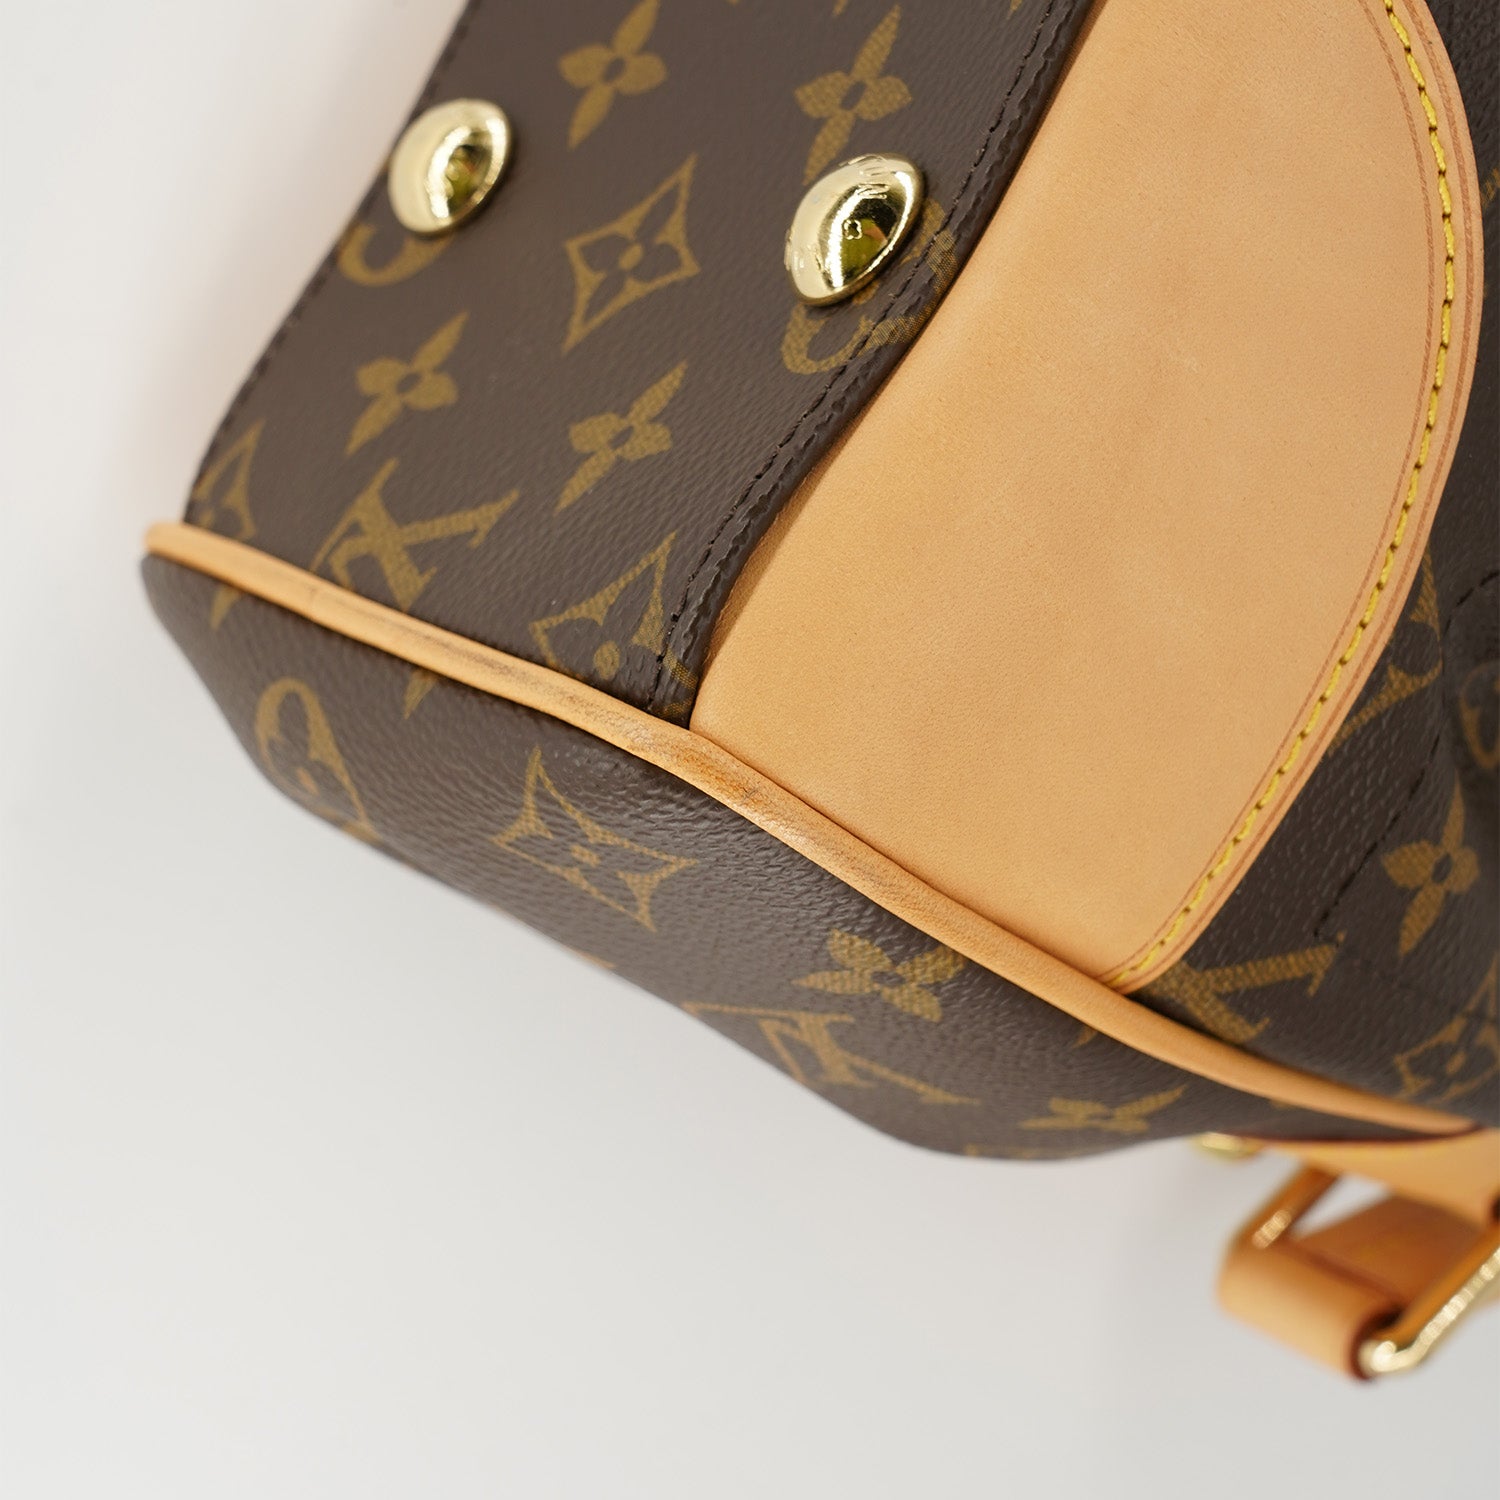 Sold at Auction: AUTHENTIC LOUIS VUITTON BEVERLY PM MONOGRAM CANVAS,  LEATHER BUSINESS HAND BAG